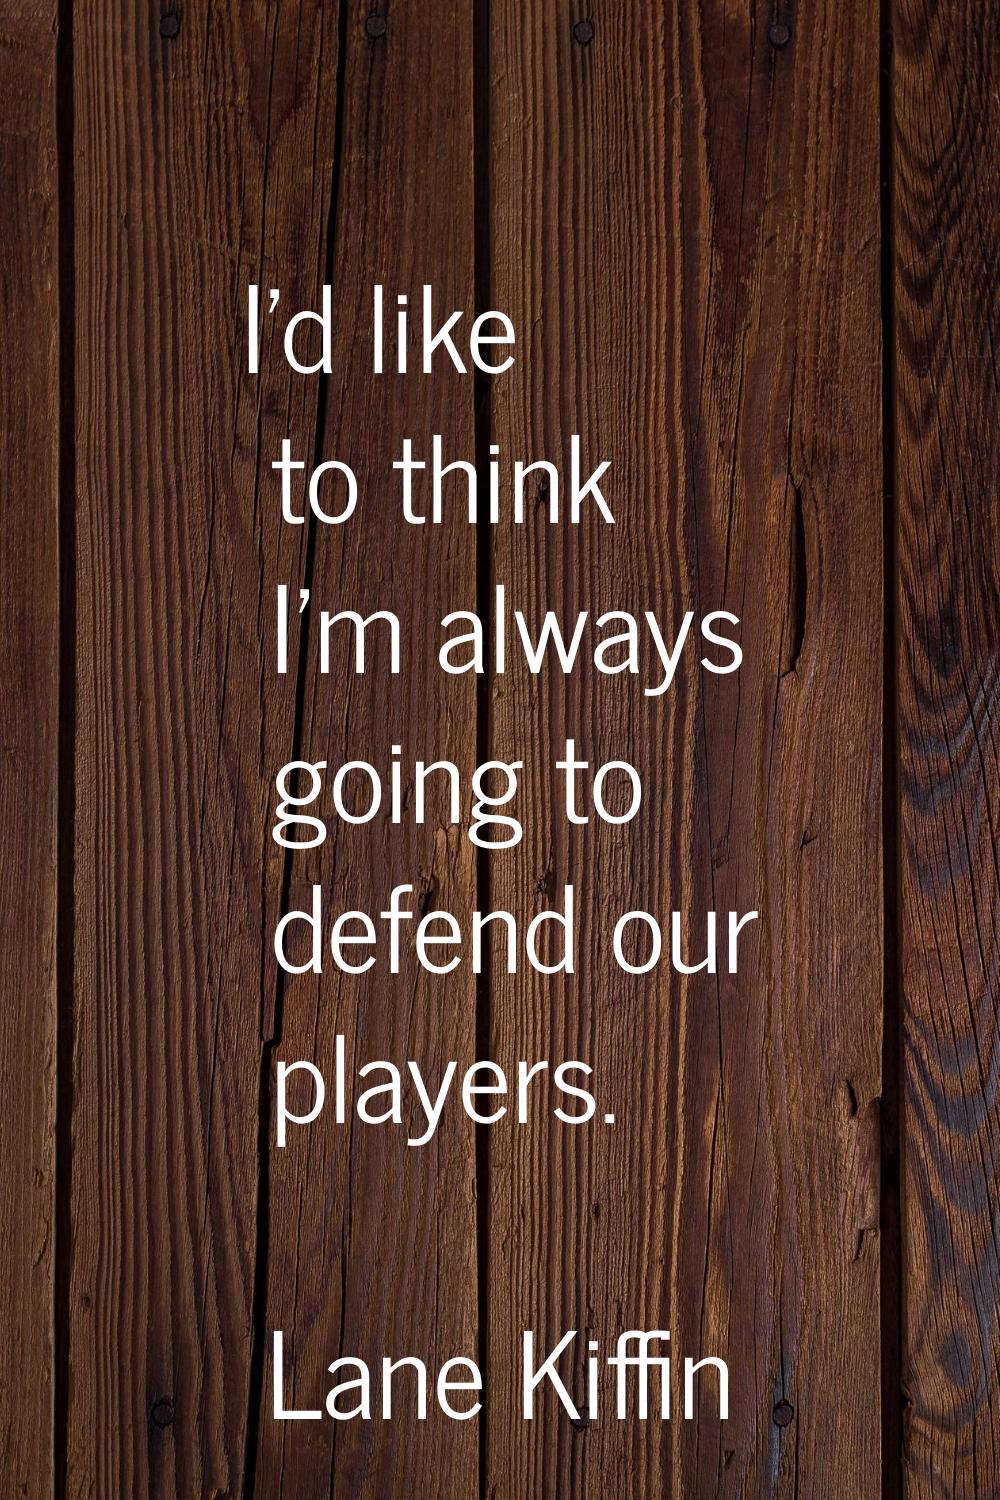 I'd like to think I'm always going to defend our players.